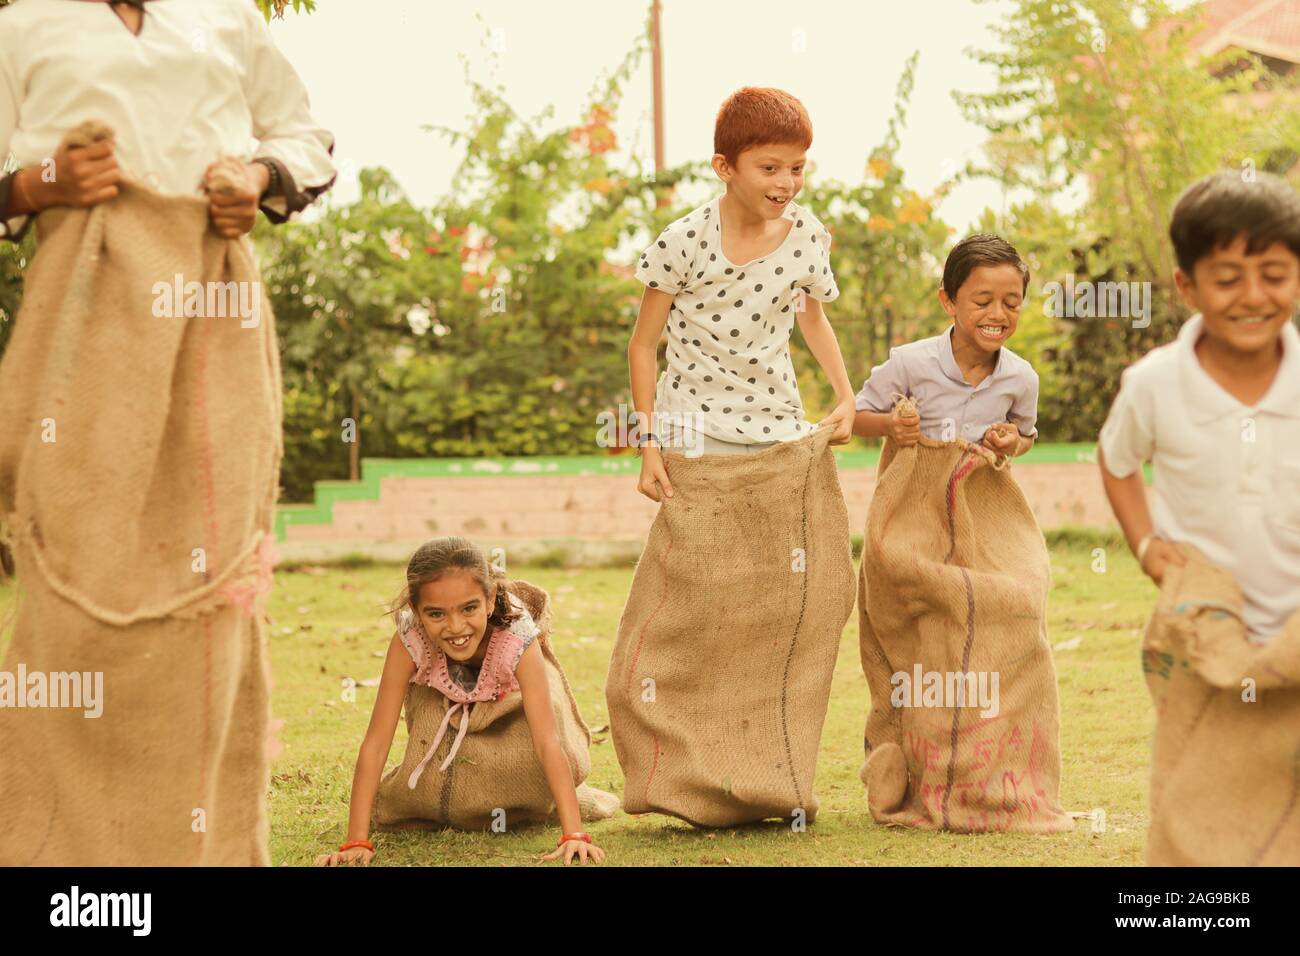 Childrens playing potato sack jumping race at park outdoor - kids falling and having fun while playing gunny sack race Stock Photo